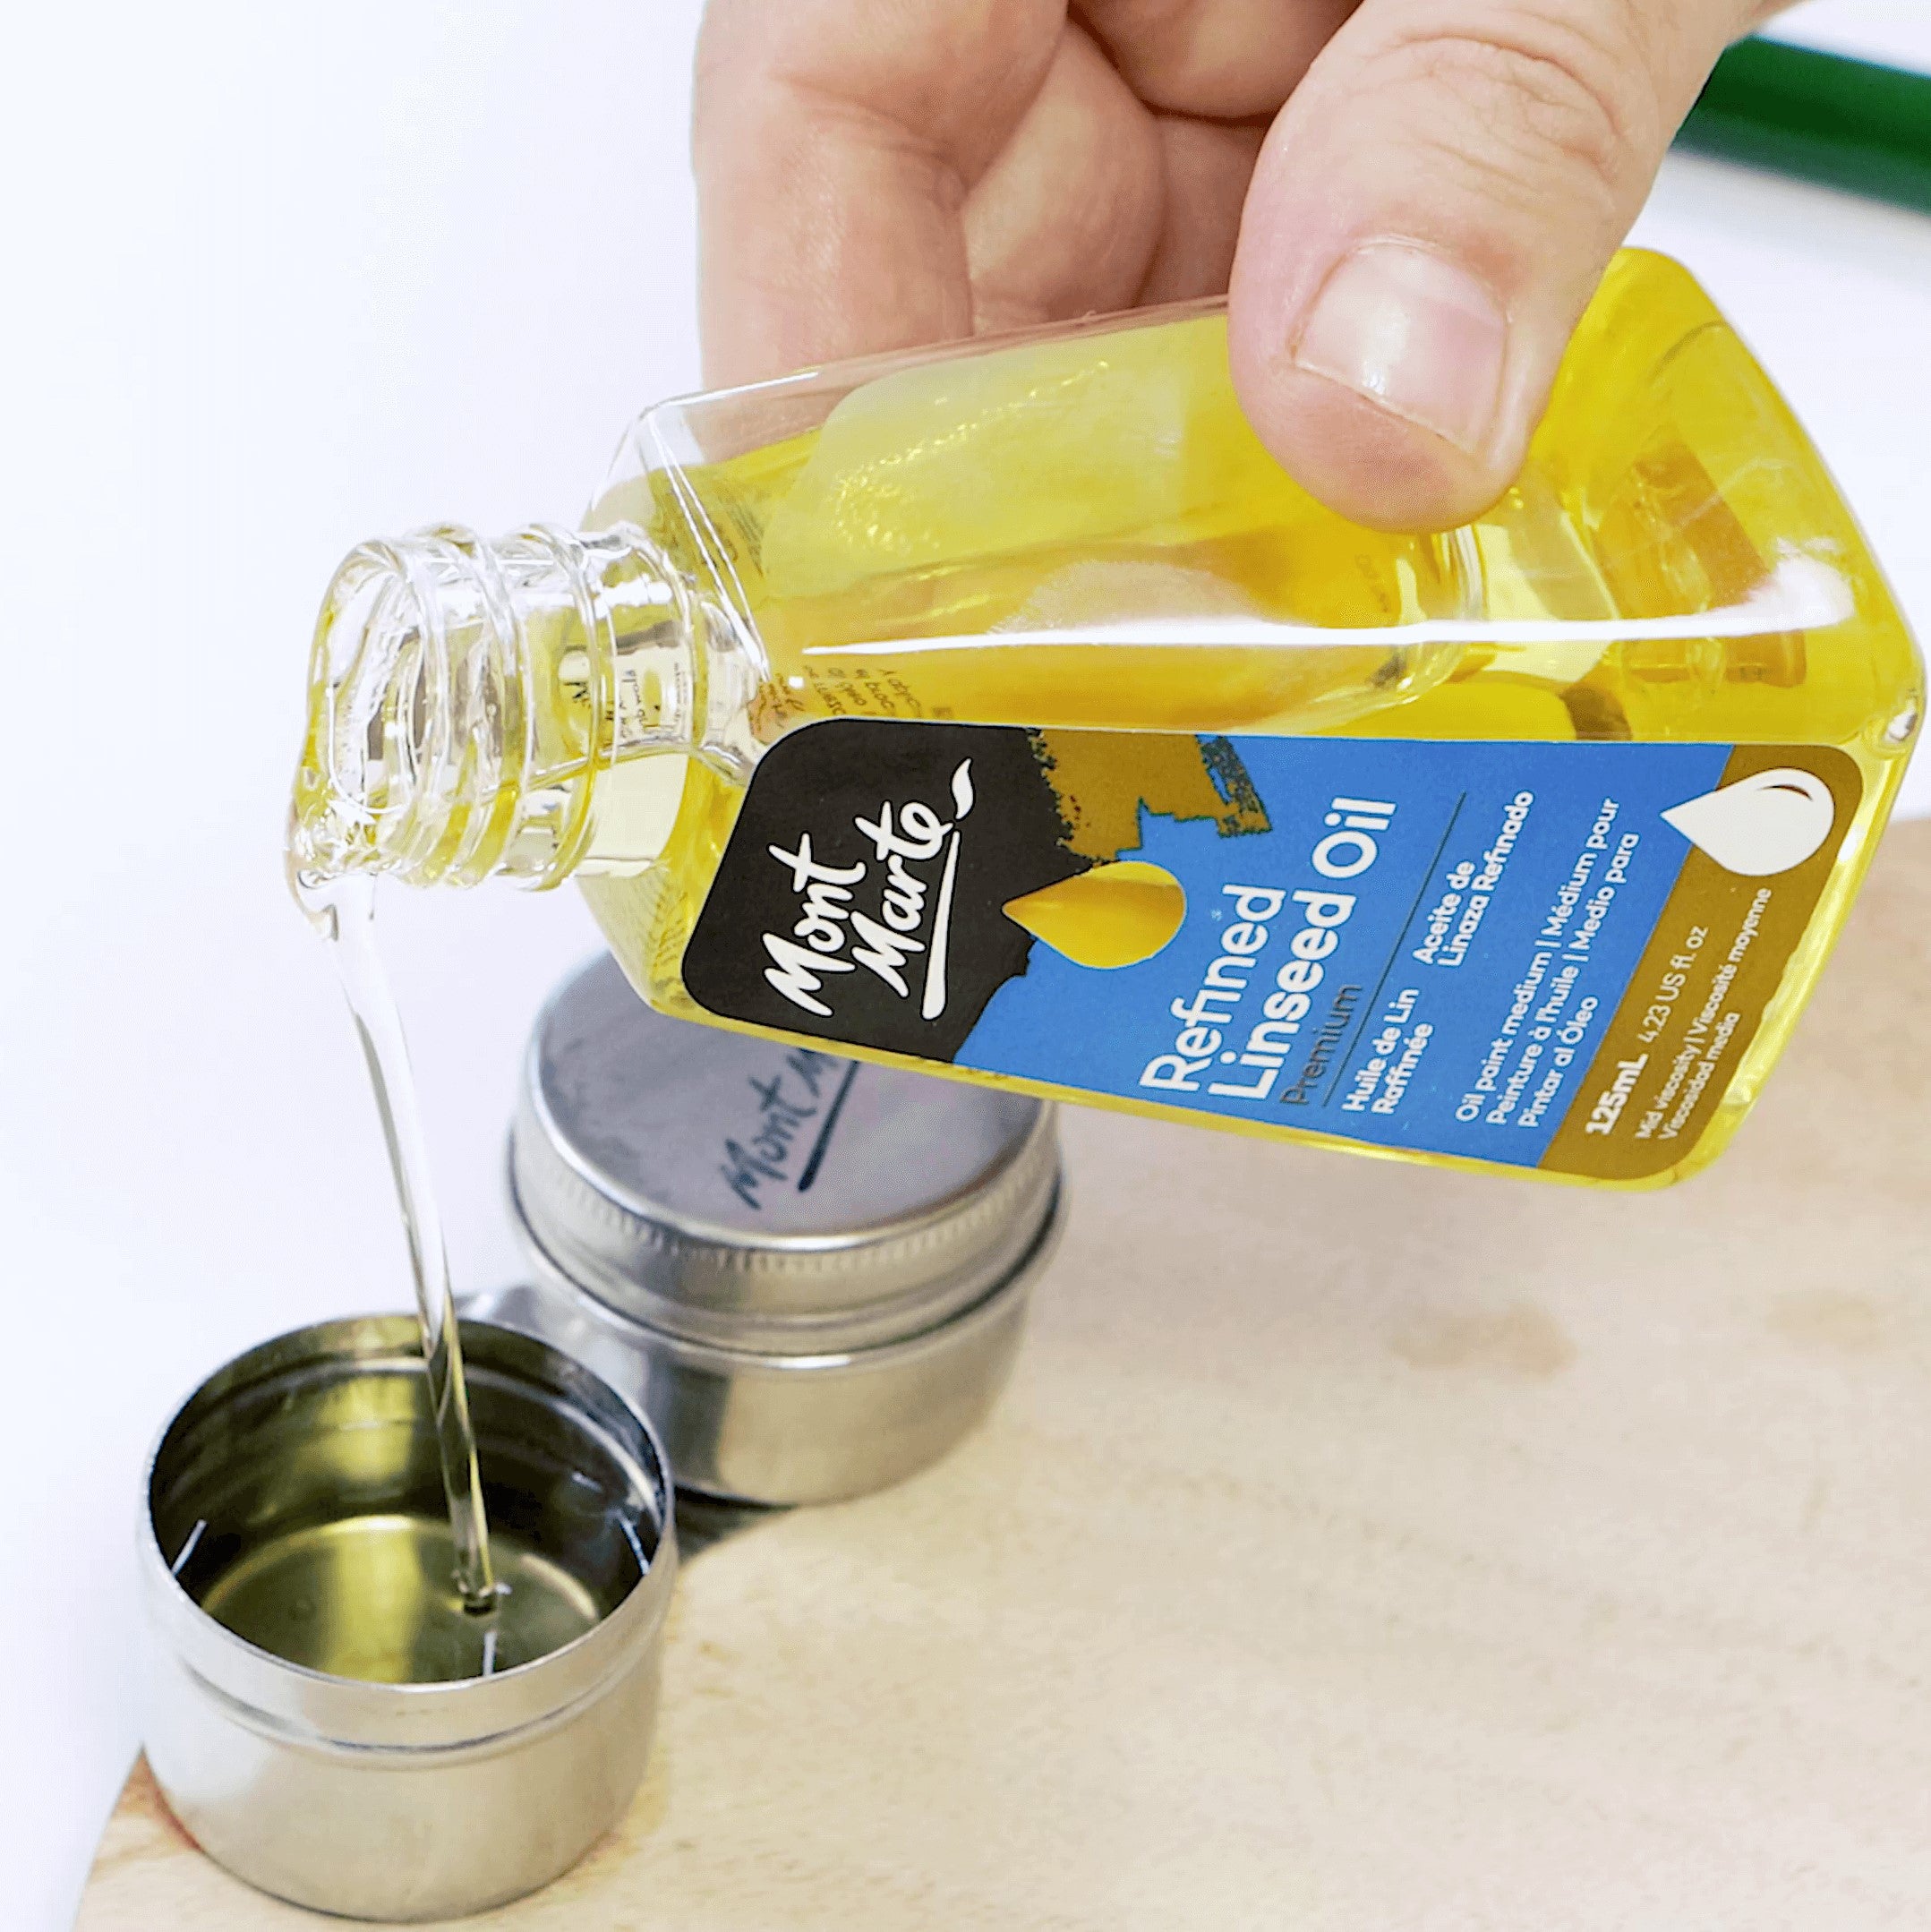 A hand pouring Mont Marte Refined Linseed Oil into a metal lid on a wooden board.